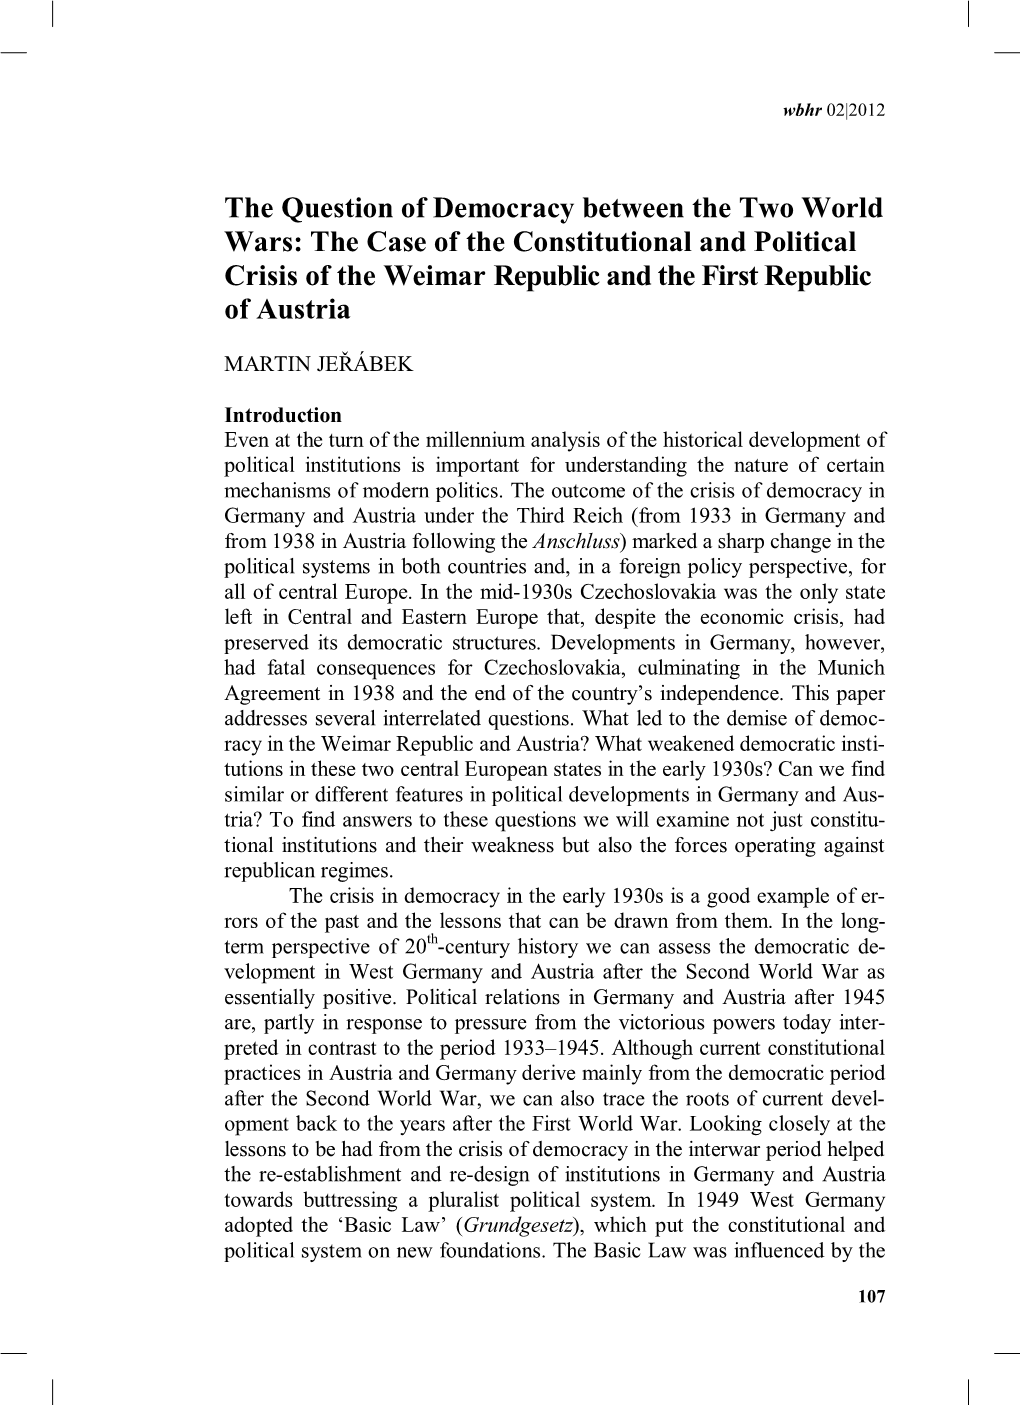 The Case of the Constitutional and Political Crisis of the Weimar Republic and the First Republic of Austria